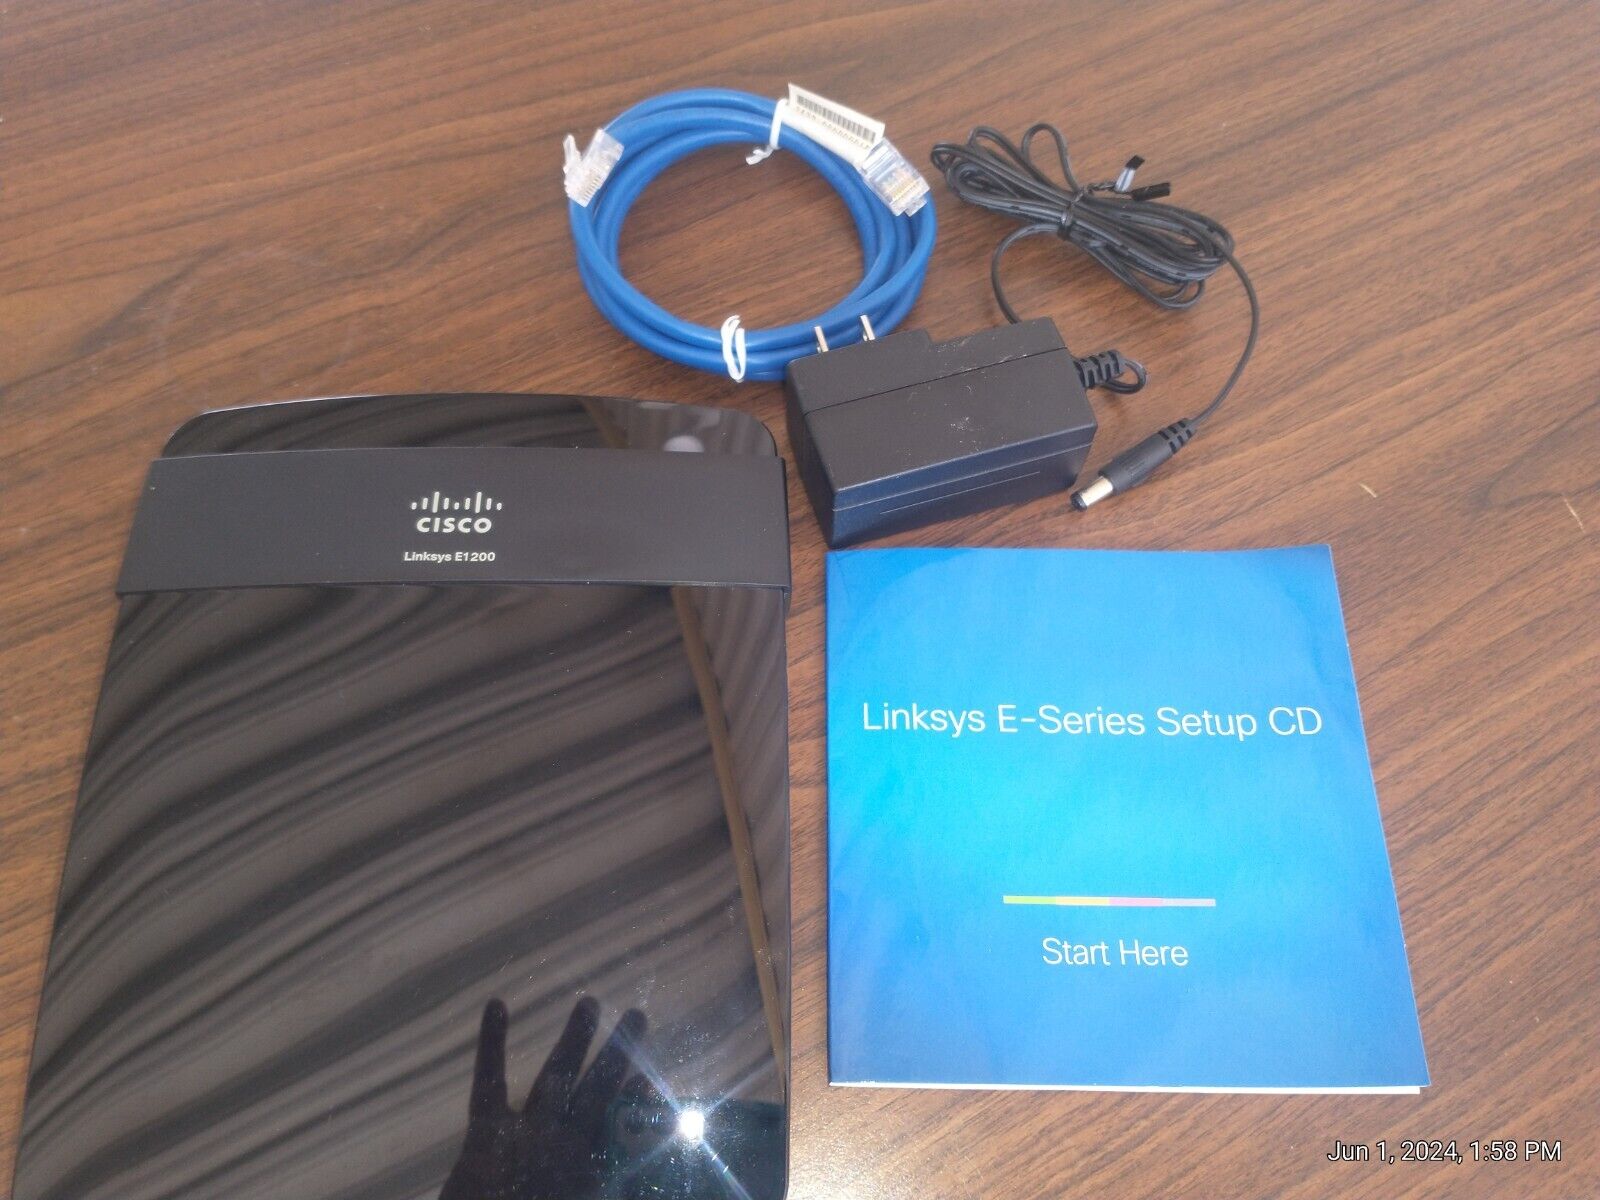 Linksys/Cisco E1200 N300 4-Port 10/100 N300 WiFi Router - brand new factory